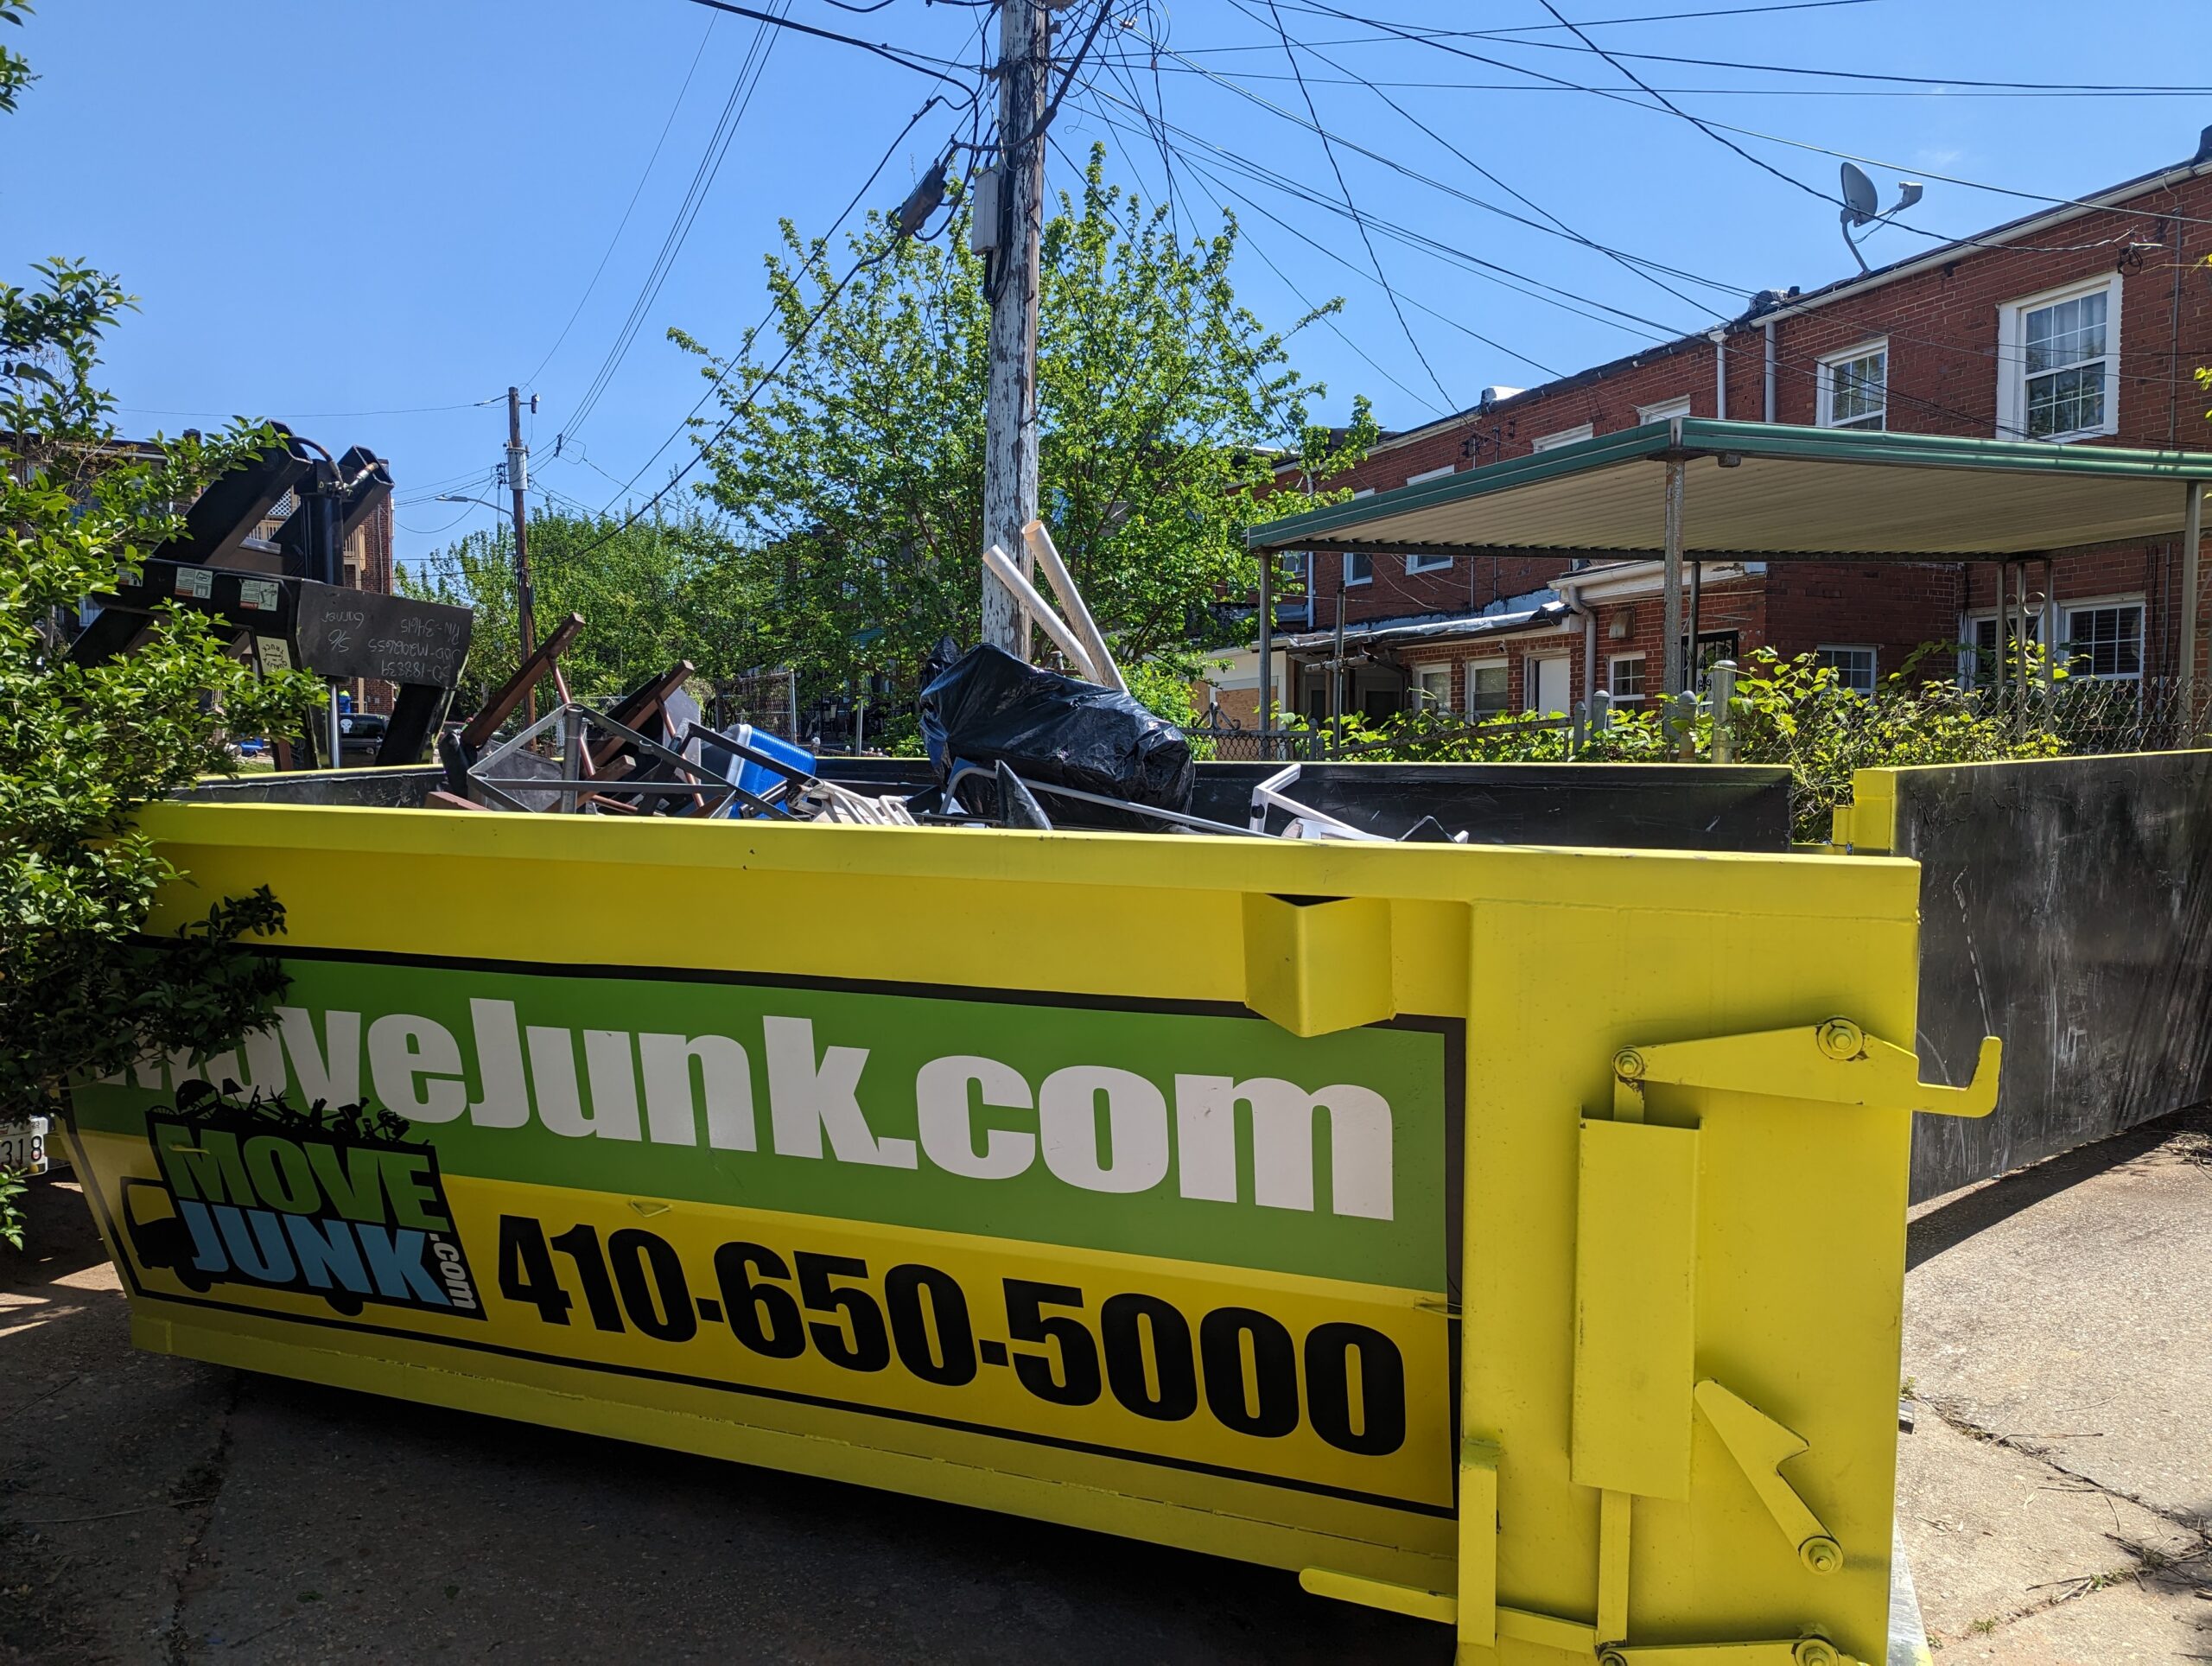 Renting a Dumpster from Move Junk